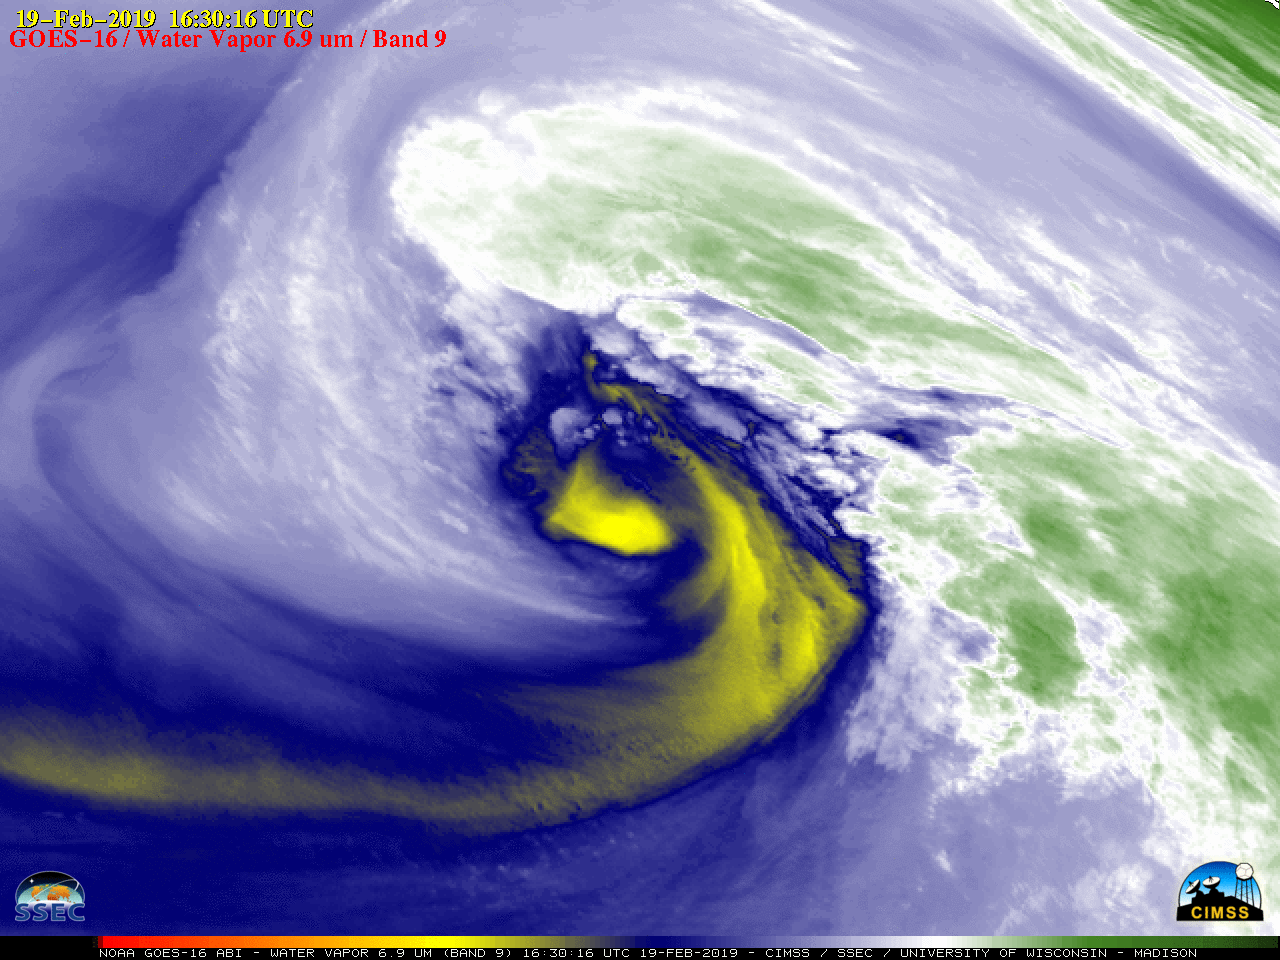 GOES-16 "Red" Visible (0.64 µm) and Mid-level Water Vapor (6.9 µm) images [click to play animation]